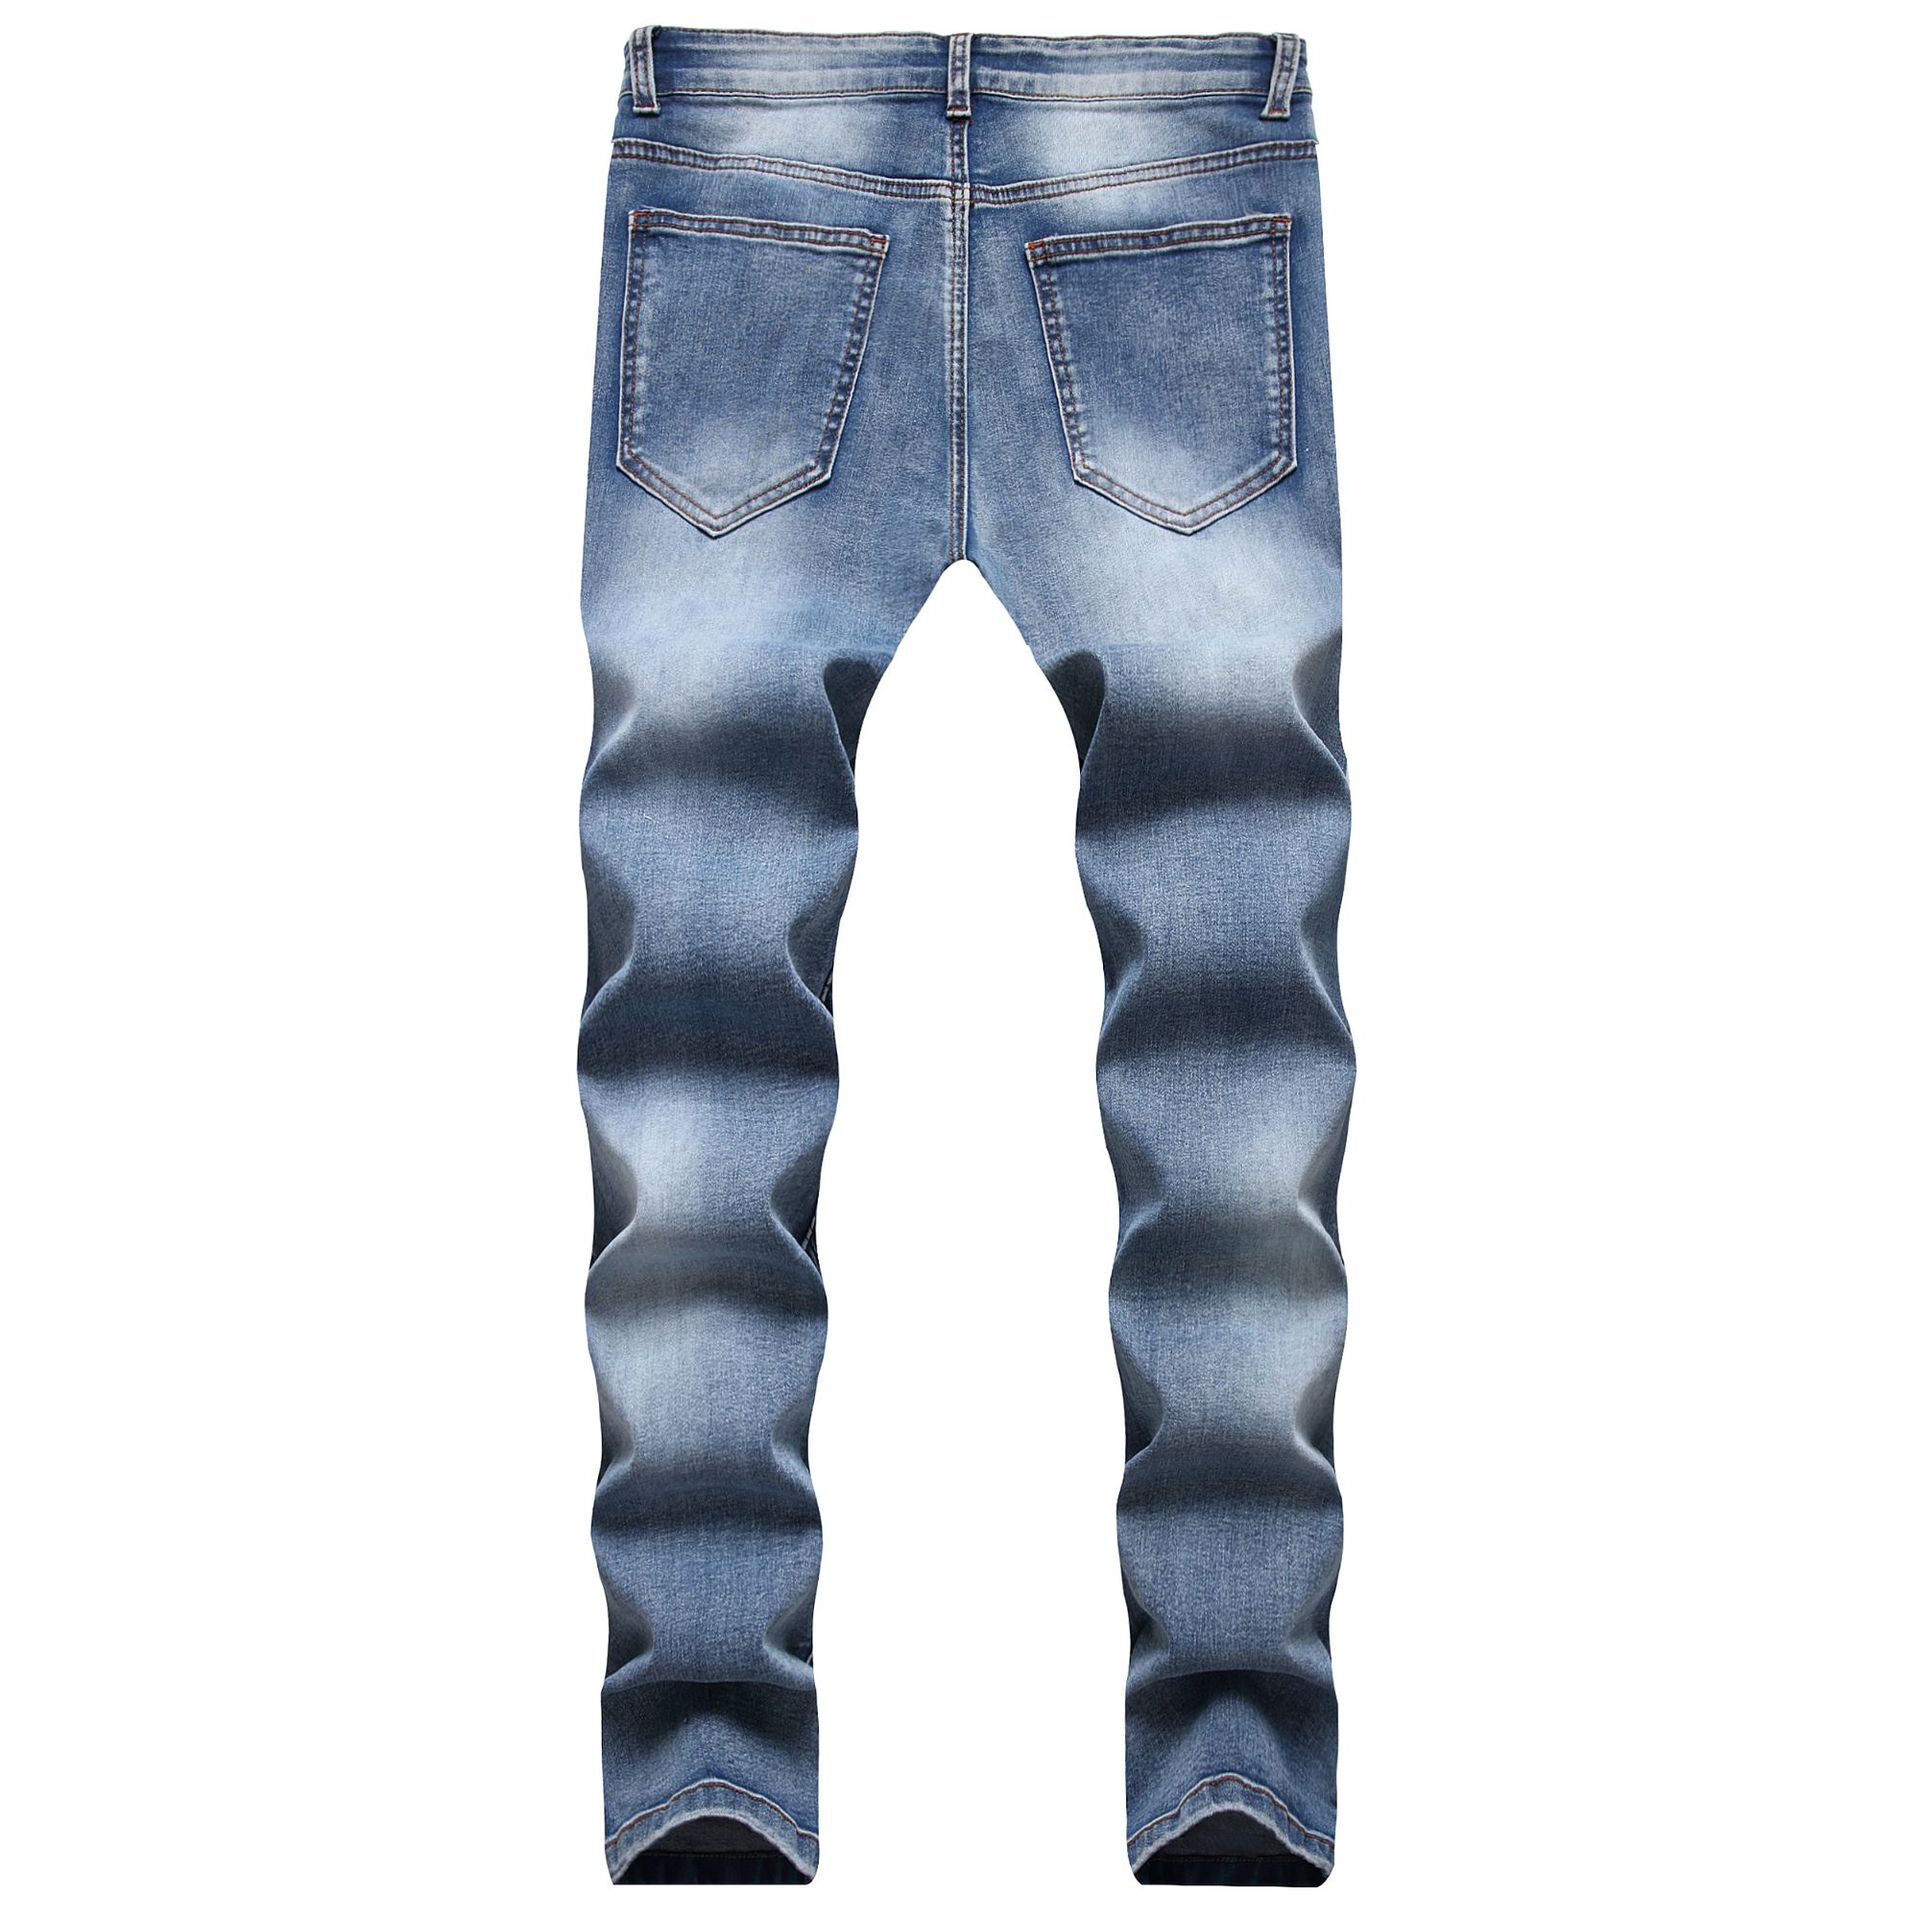 Men's Light Washed Pink Patchwork Ripped Jeans - RippedJeans® Official Site